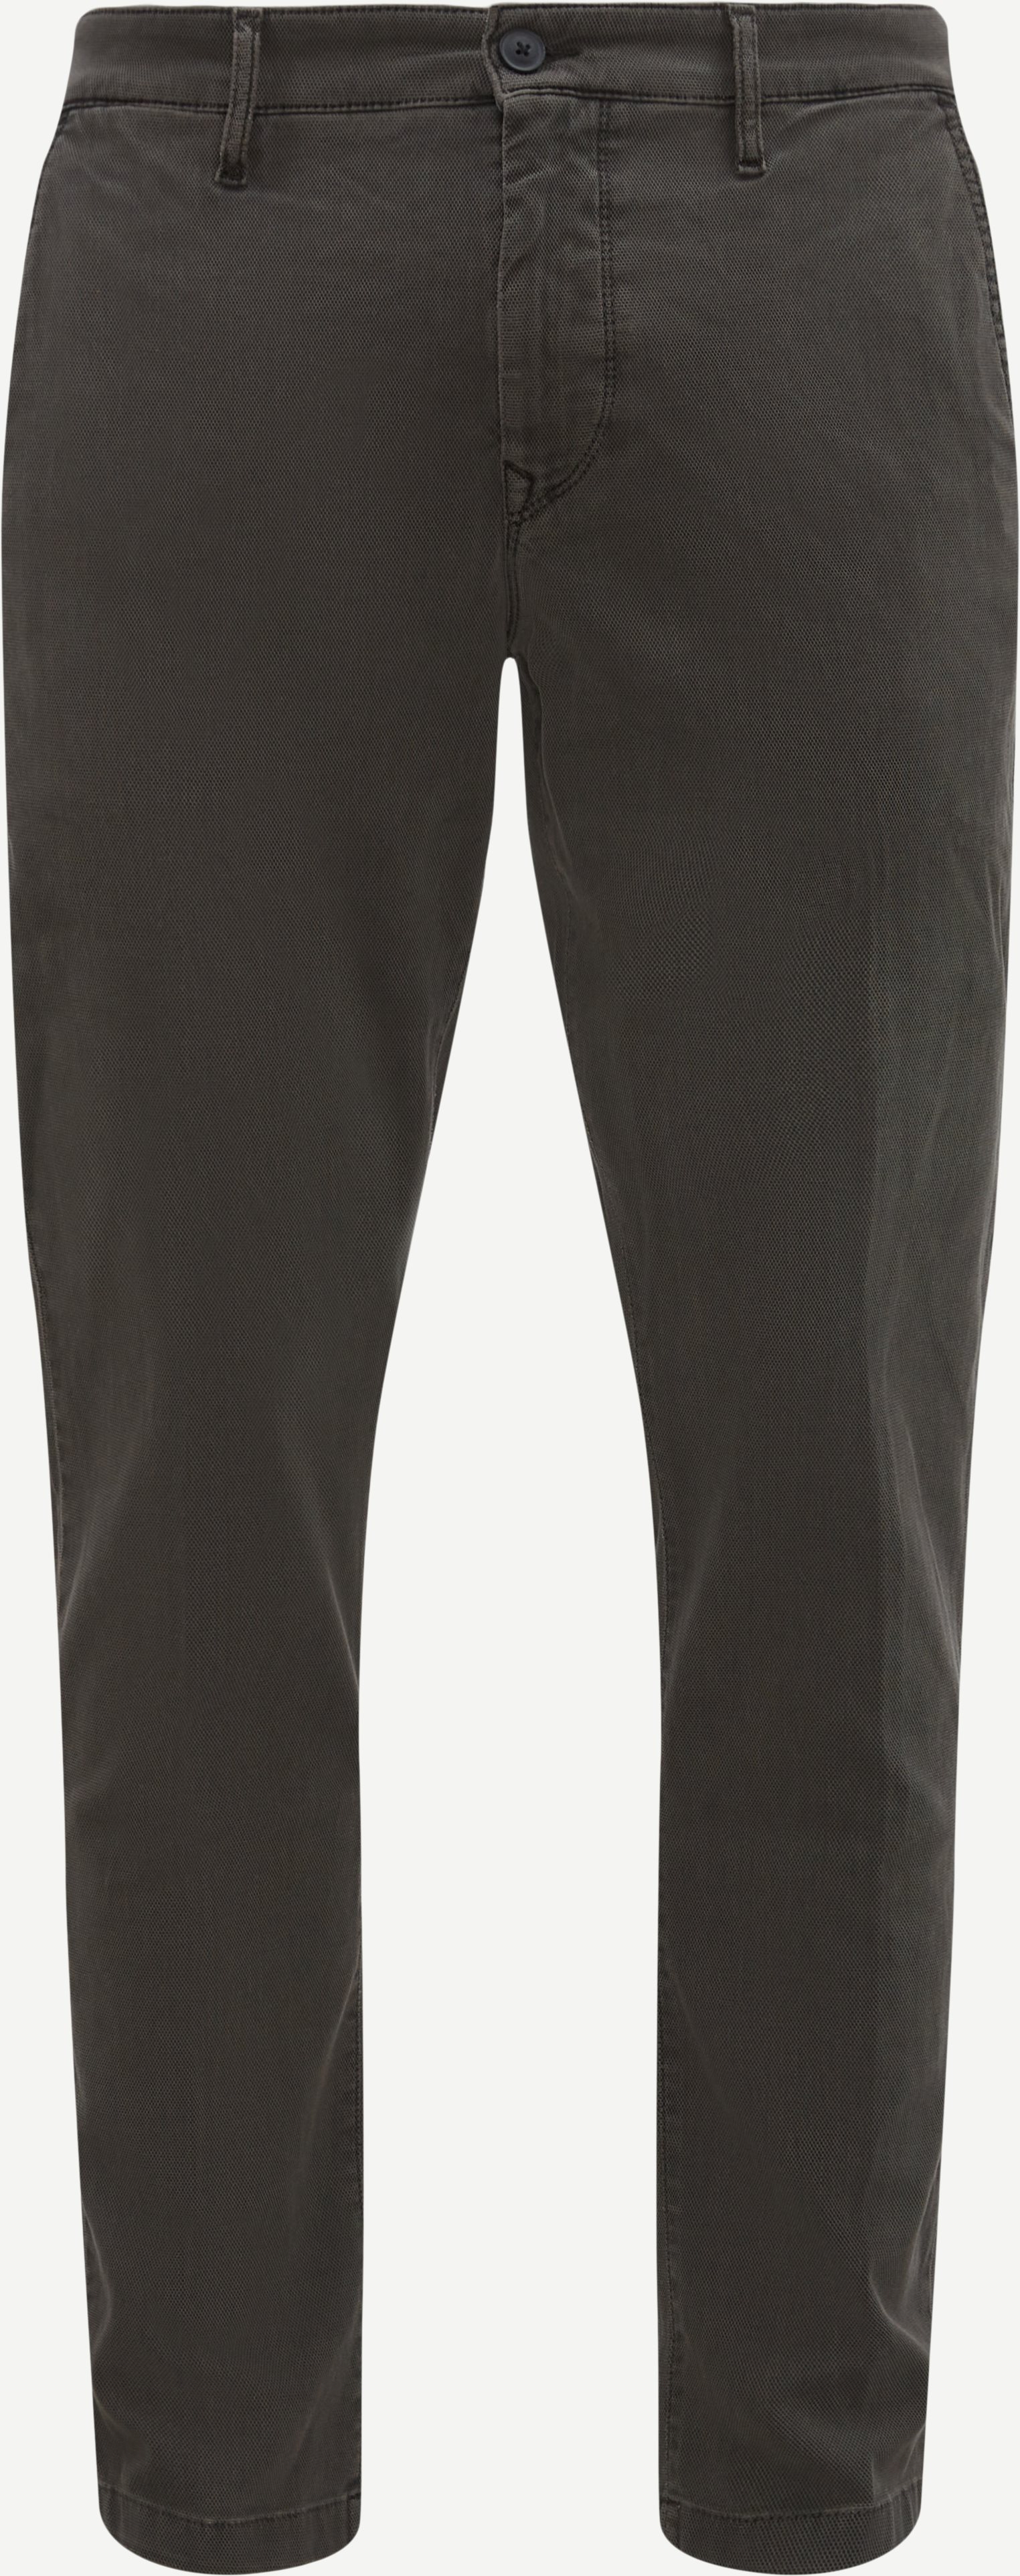 Trousers - Tapered fit - Grey